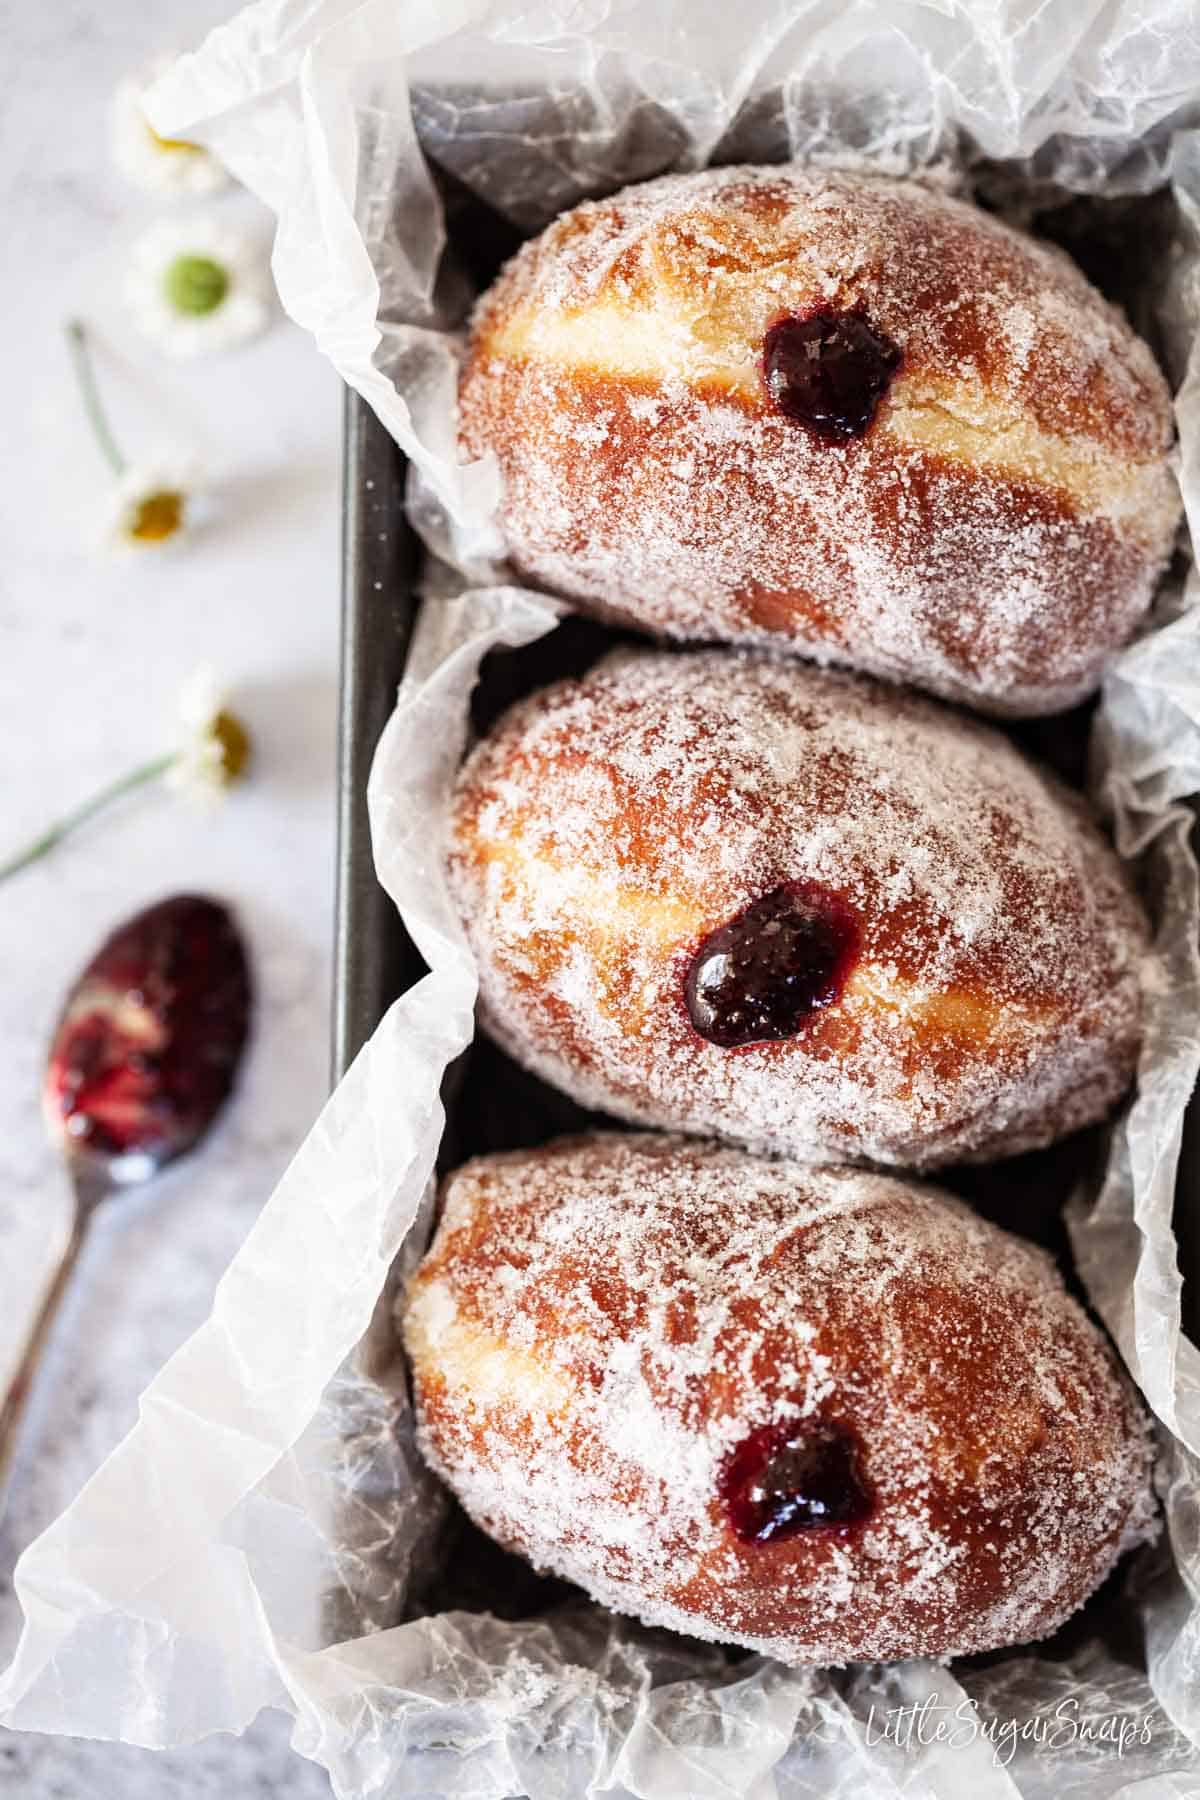 Close up of sugar coated jam doughnuts filled with blackberry jam.